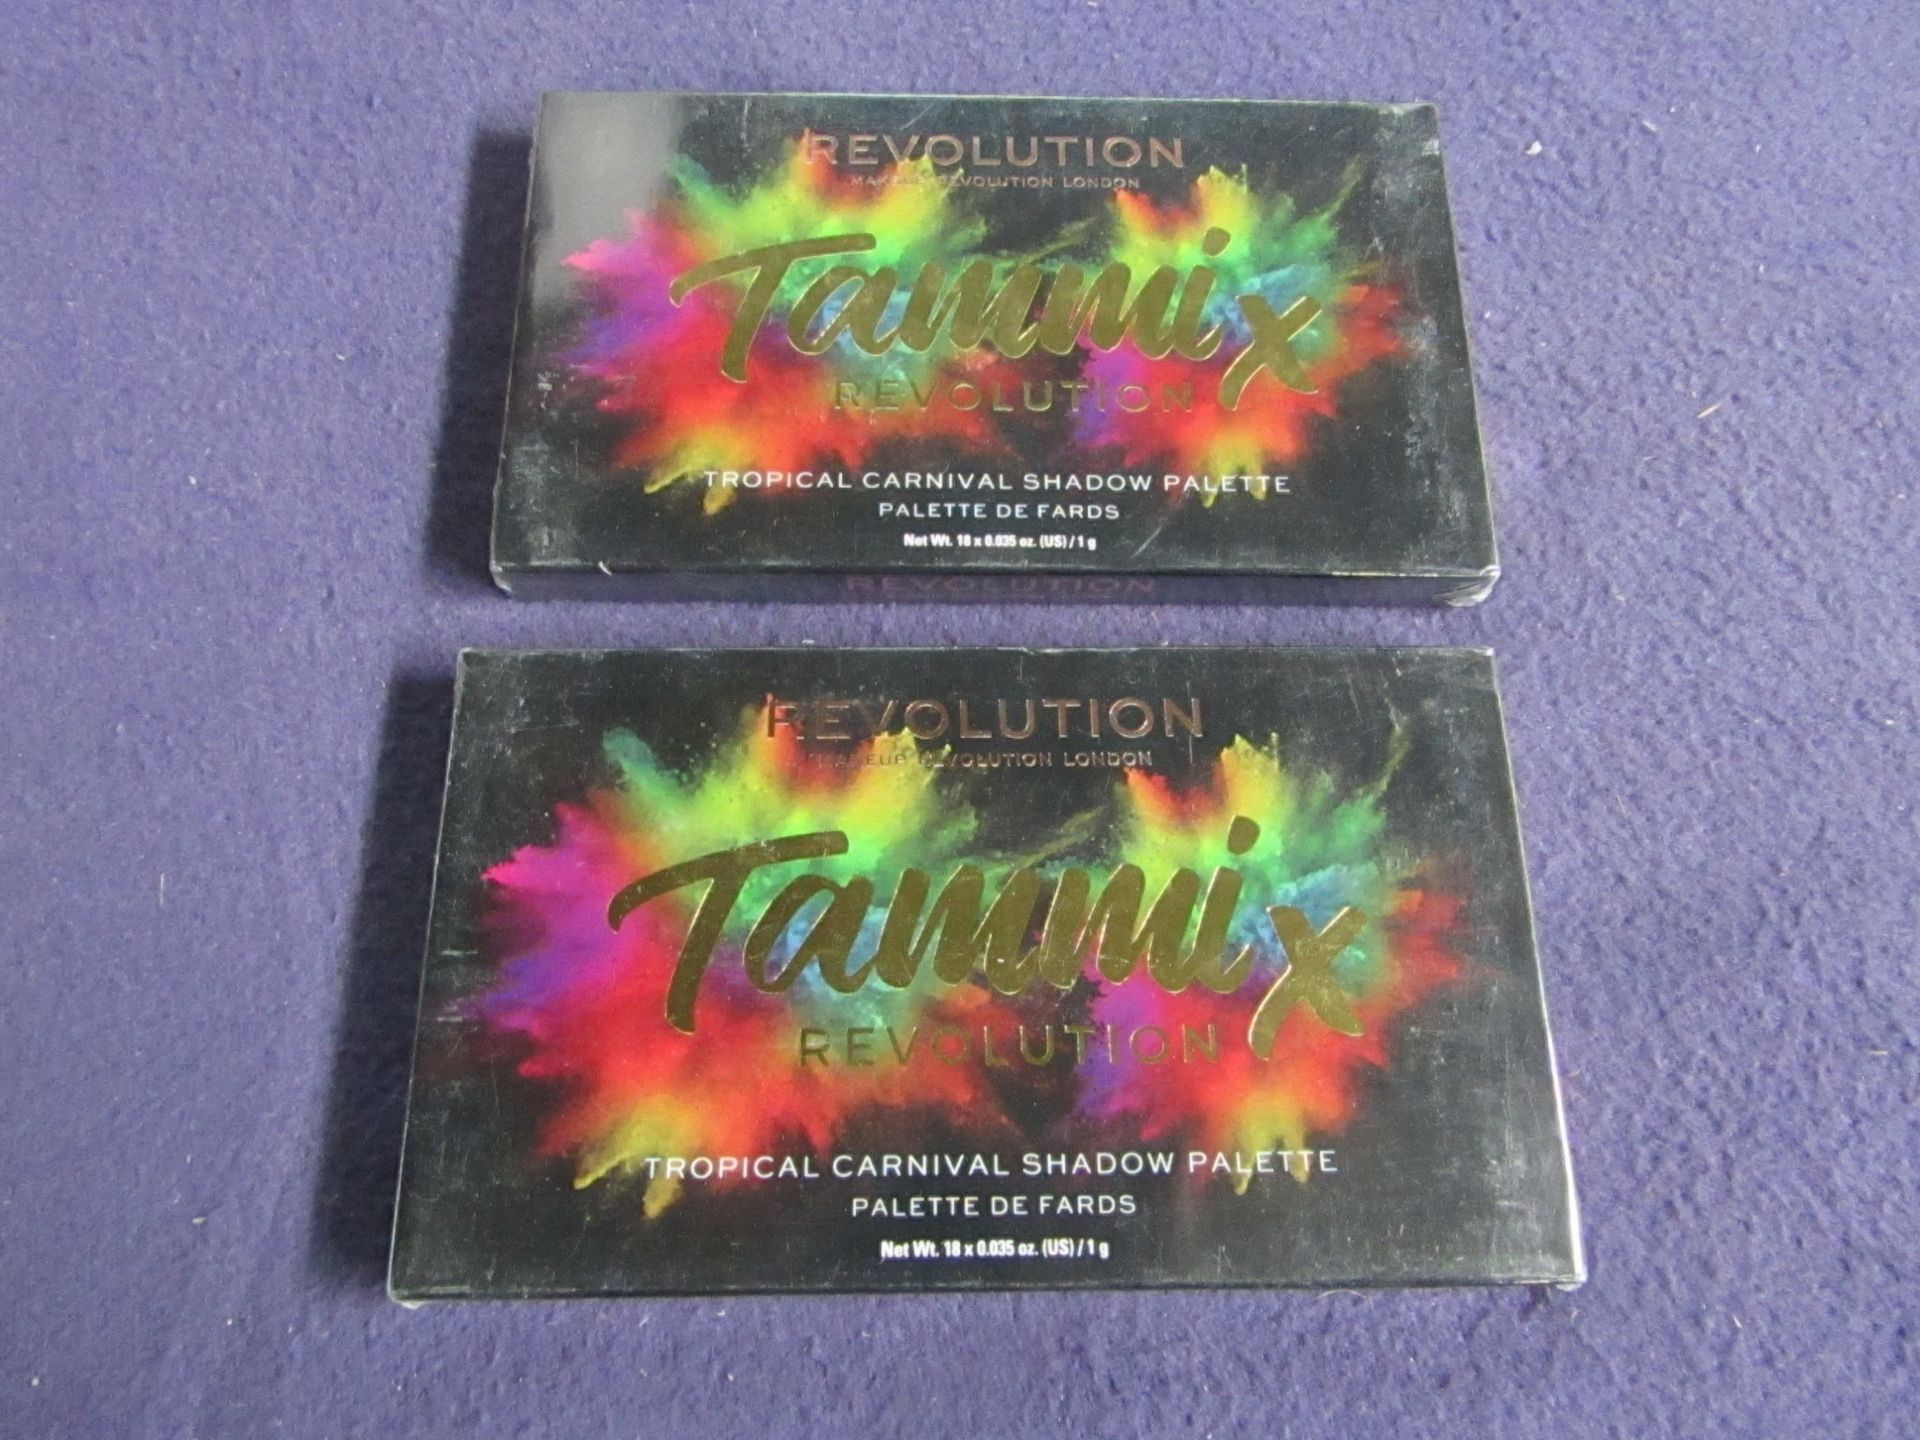 2x Revolution London - Tammix Tropical Carnival Shadow Palette - Unused & Packaged.